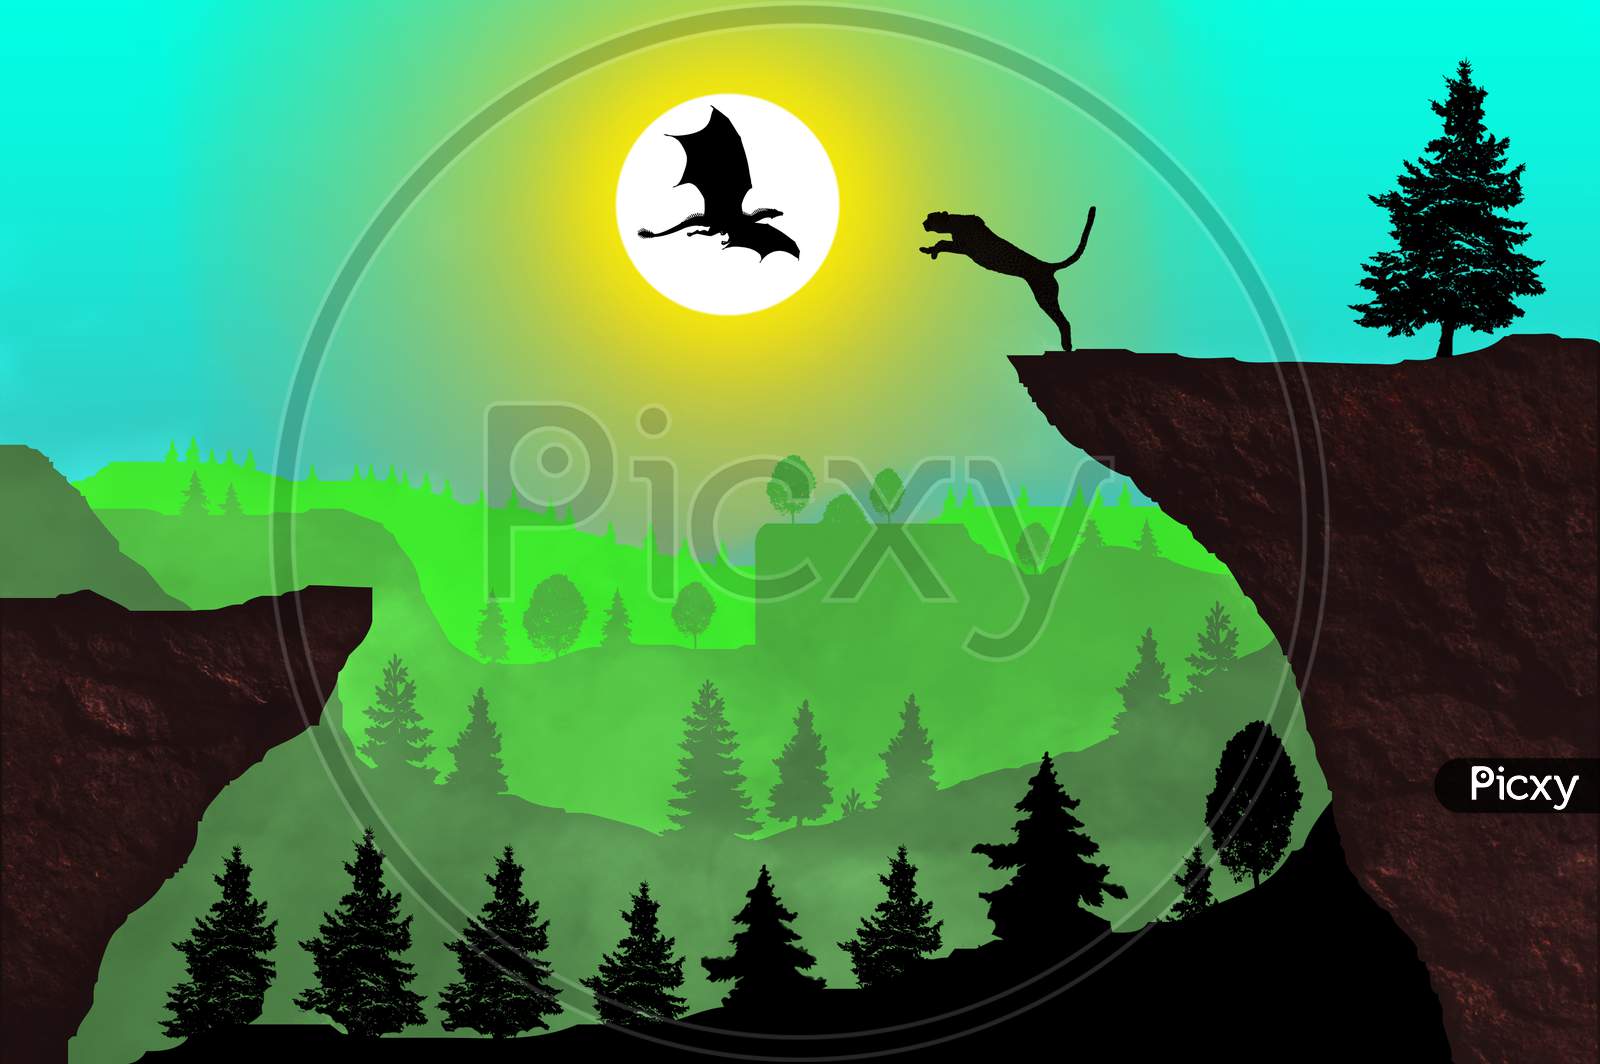 Green Scenery Of Forest , Mountains , Sun And A Leopard Jumping On Flying Dragon Under Blue Sky